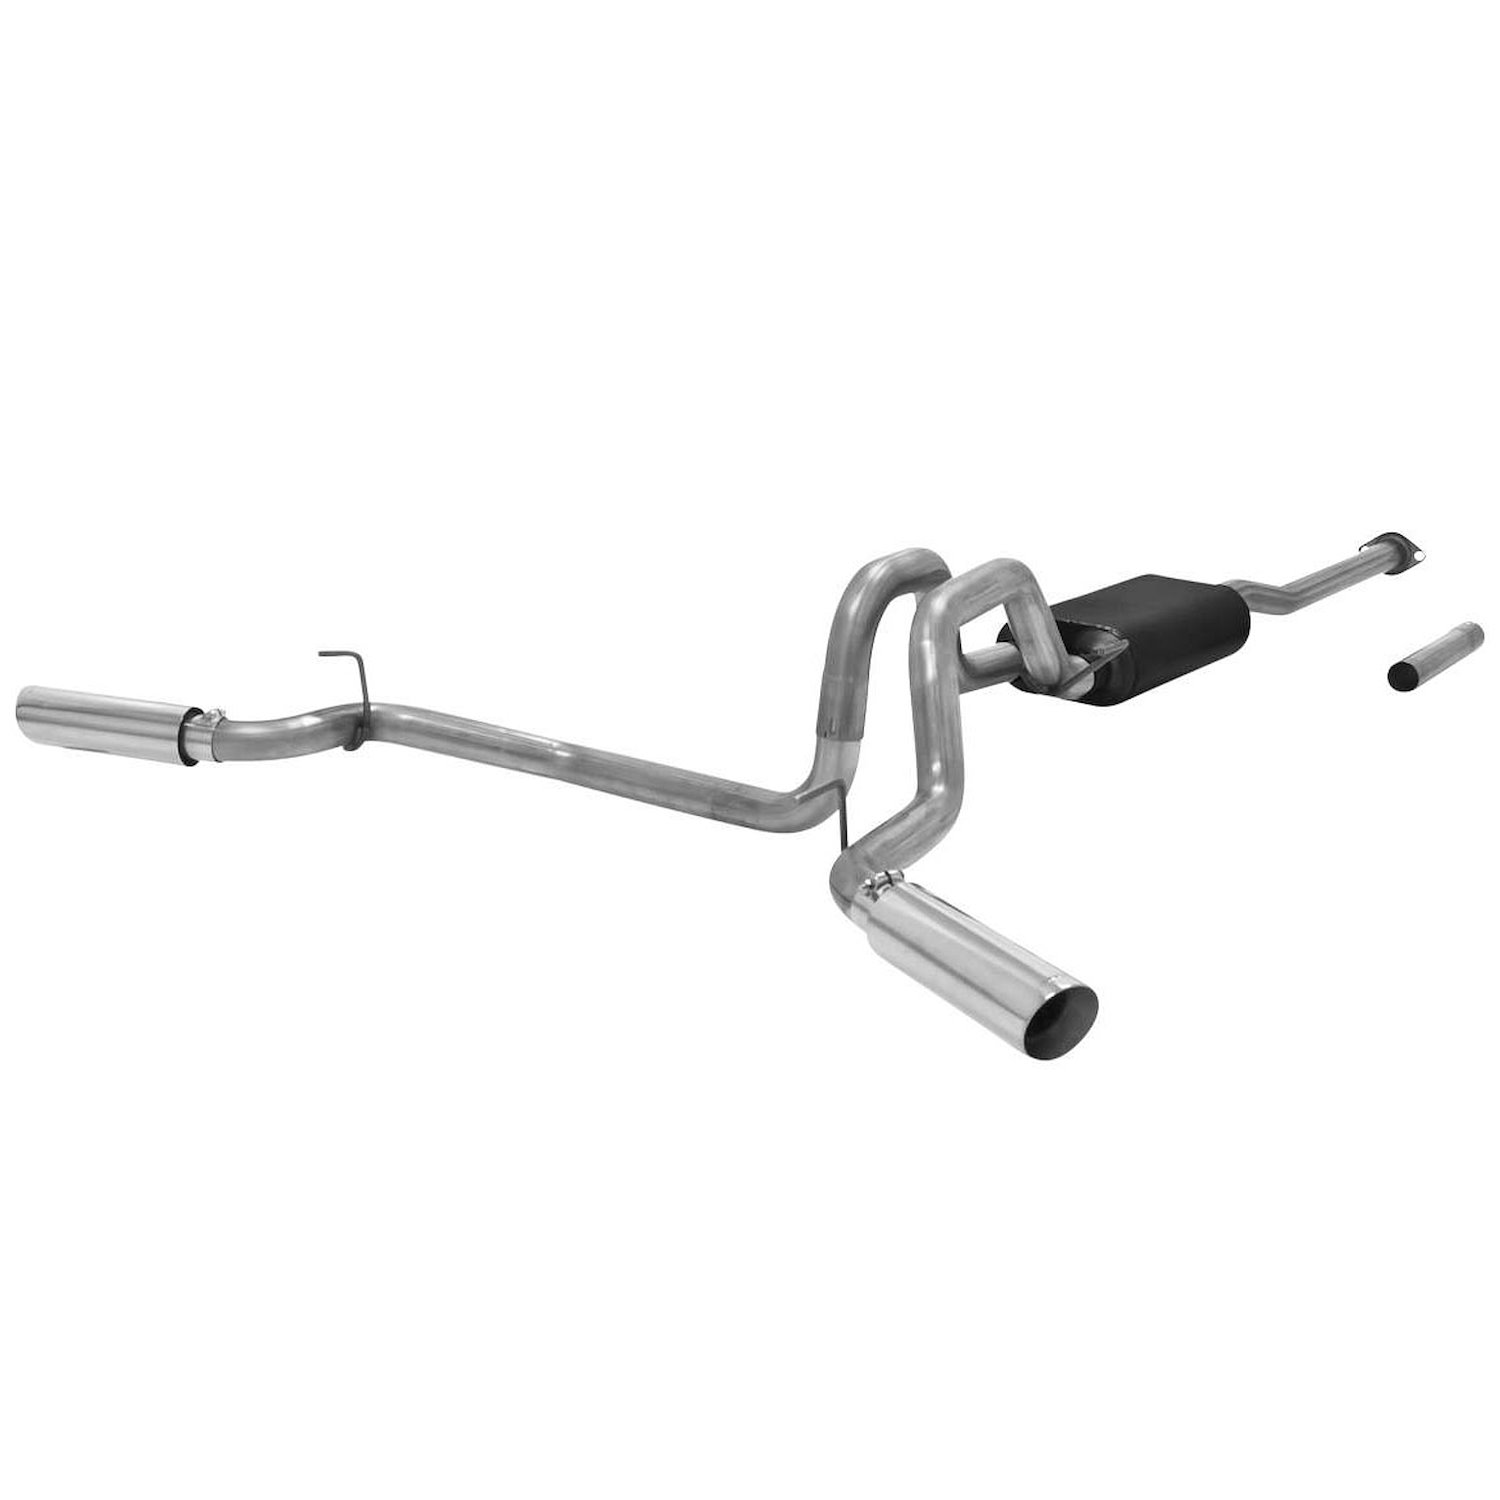 American Thunder Cat-Back Exhaust System 2013-2015 Tacoma 4.0L V6 (Exc. Std Cab/X-Runner)